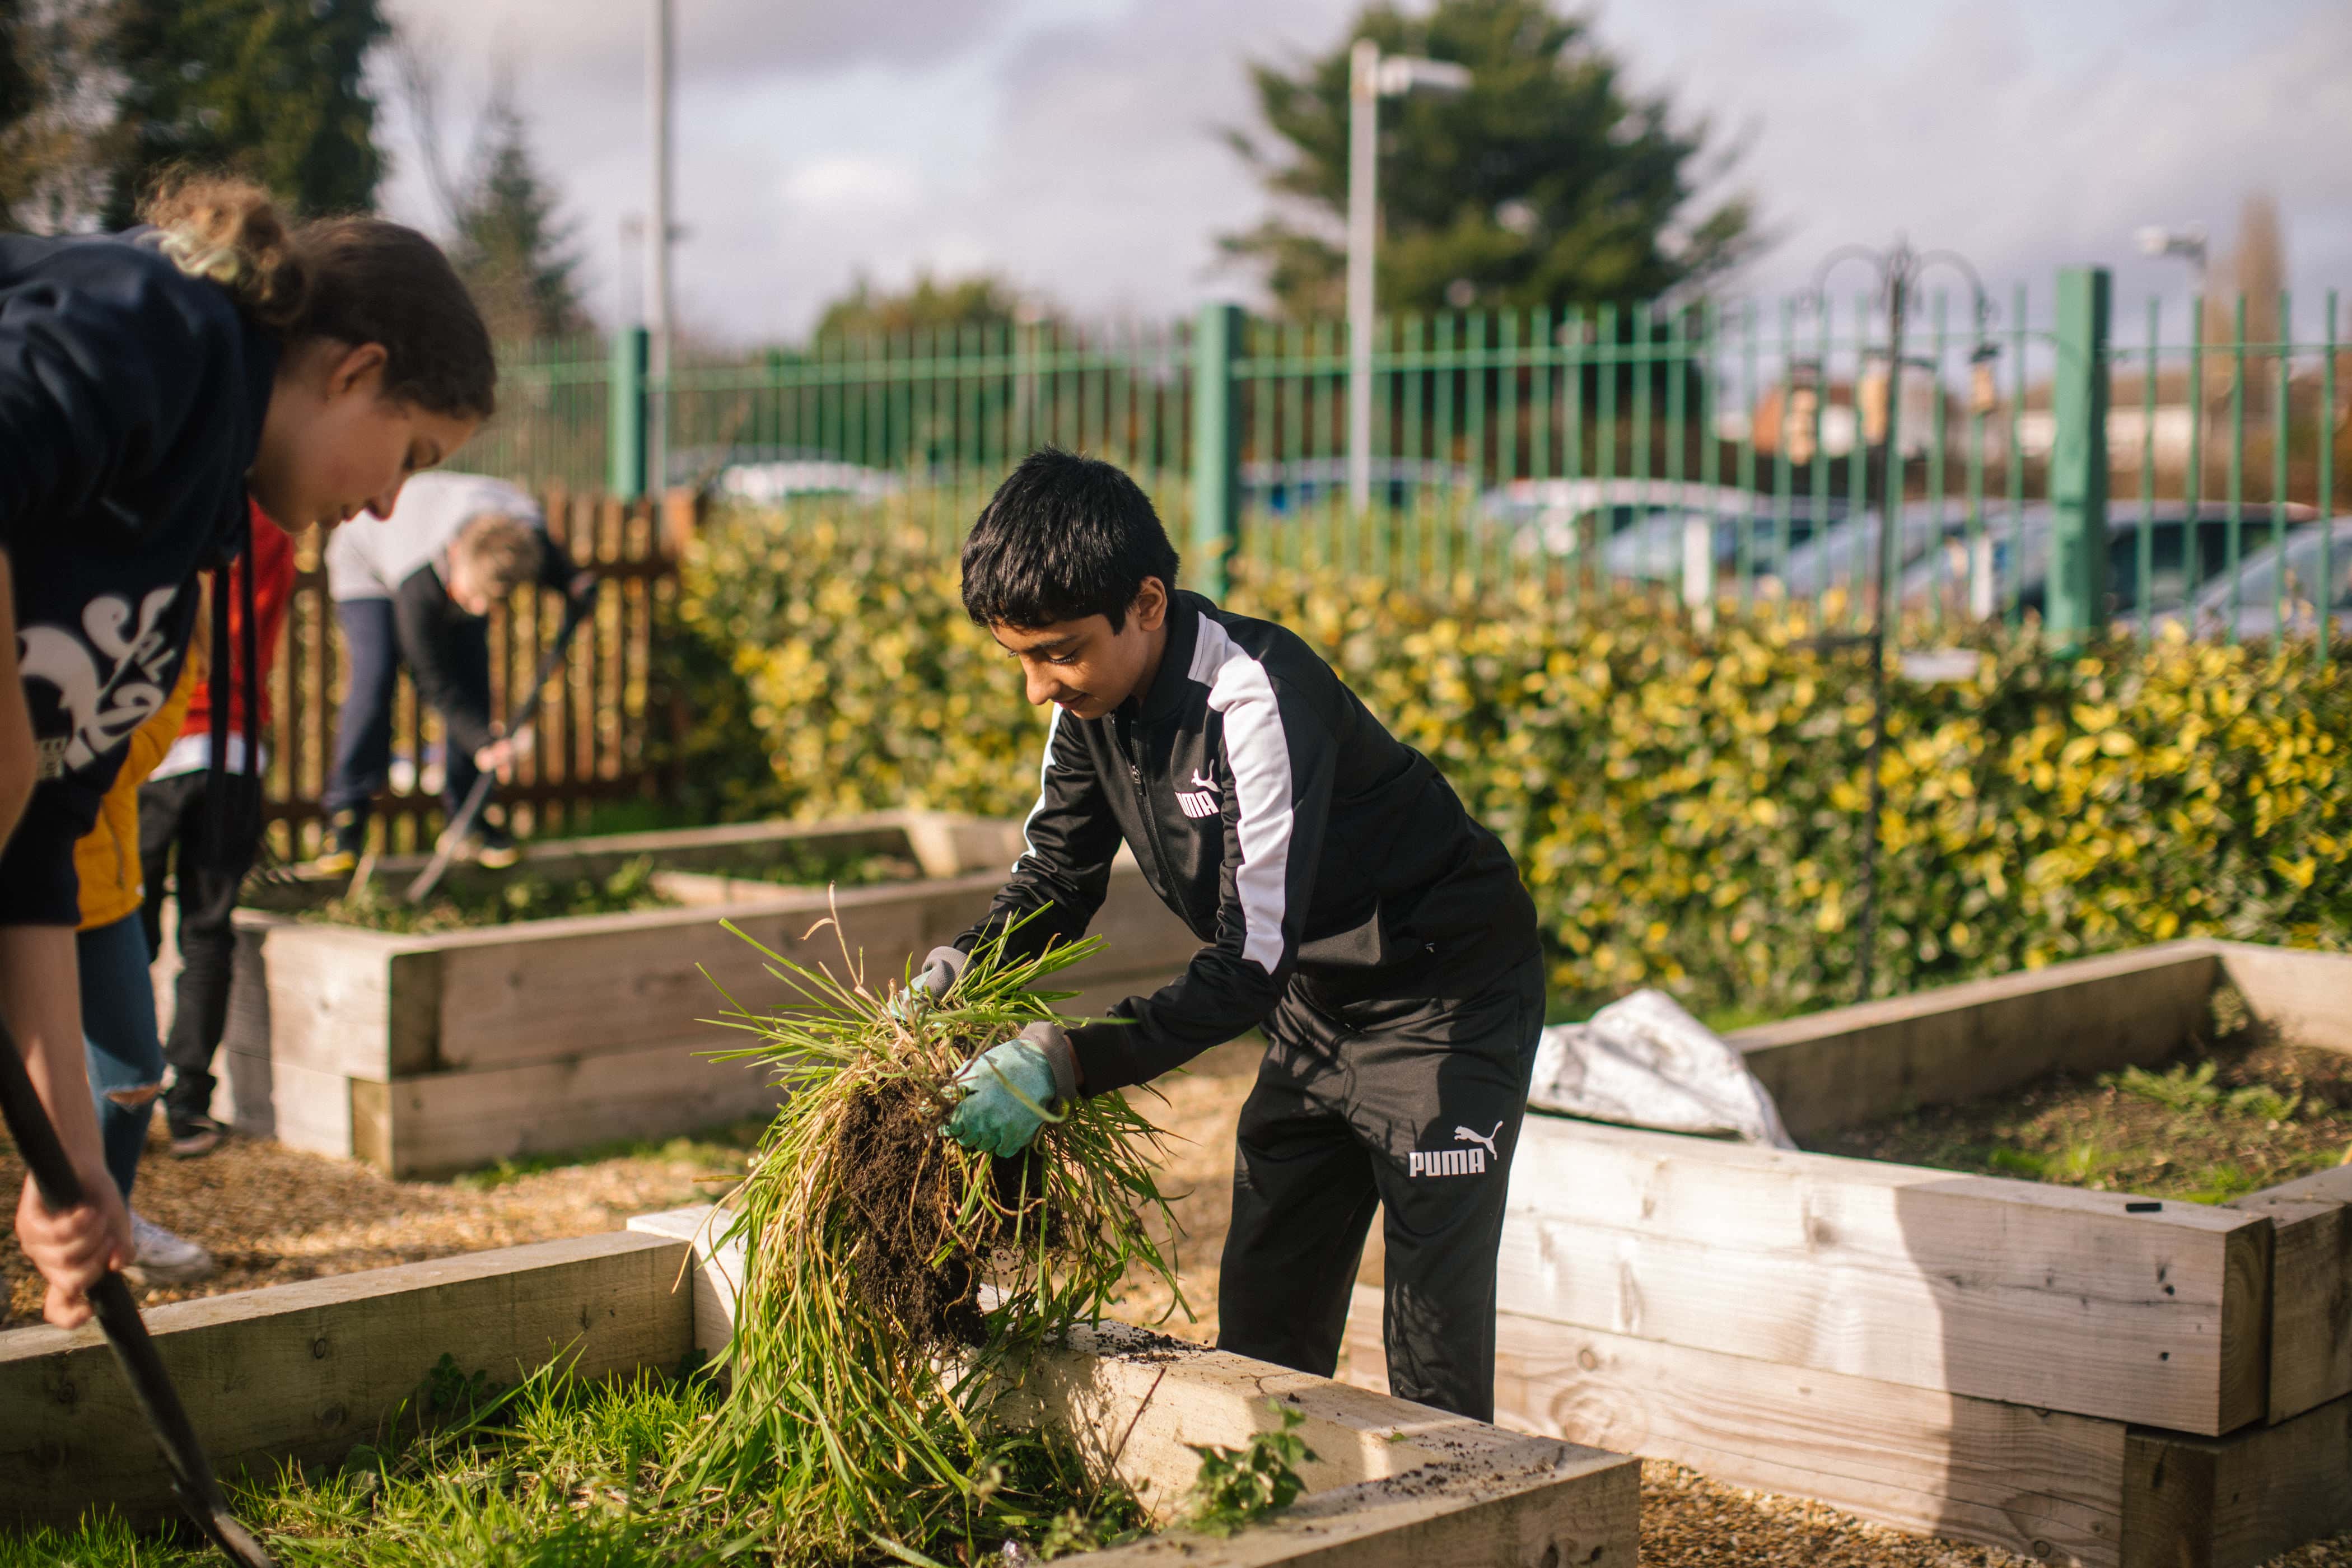 A young boy in a black track suit is holding green grass in his hands as he works with an adult on a raised planting bed